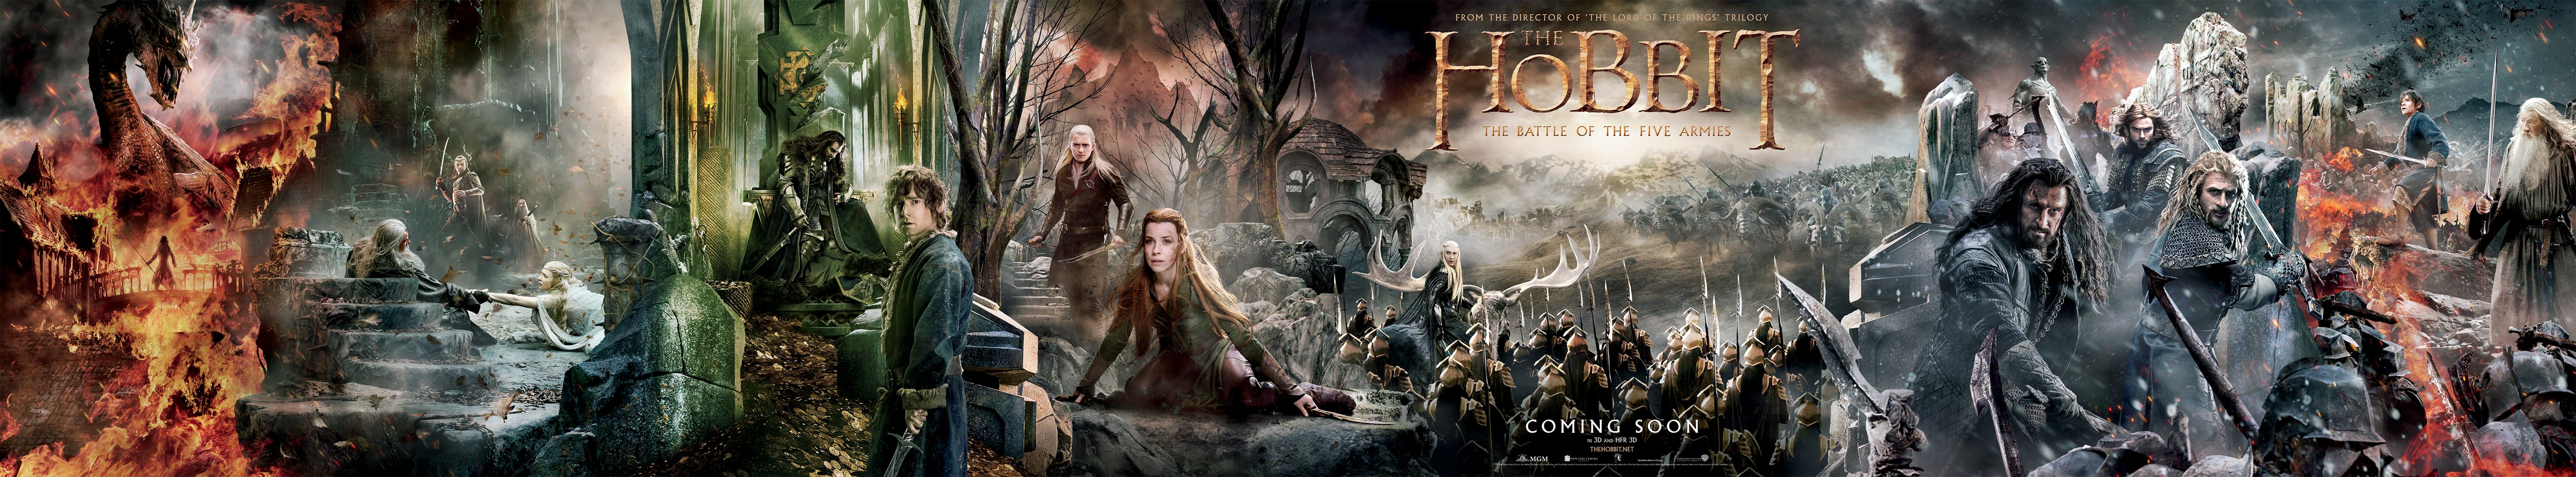 The Hobbit The Battle of the Five Armies Tapestry